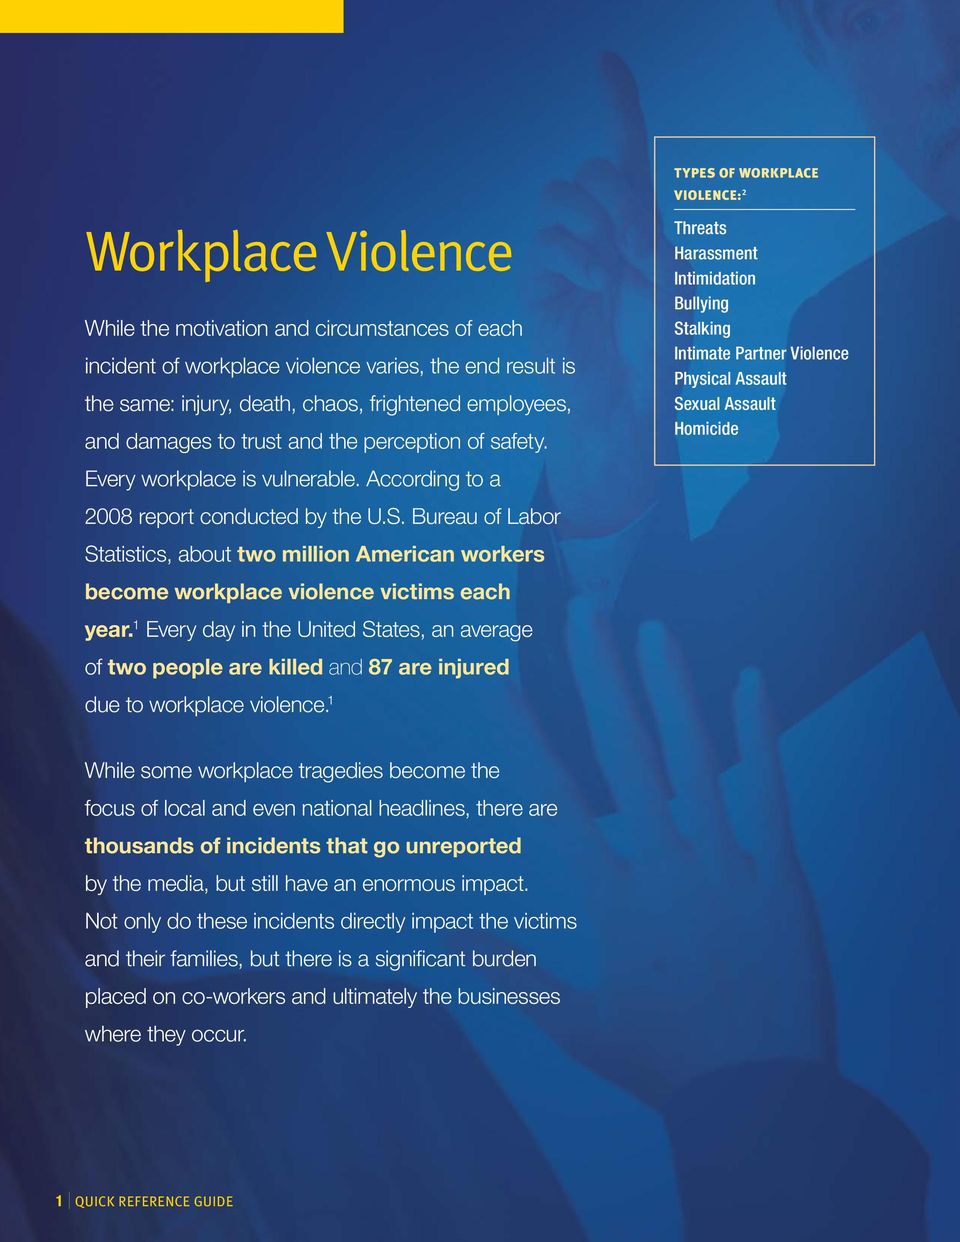 Bureau of Labor Statistics, about two million American workers become workplace violence victims each year.